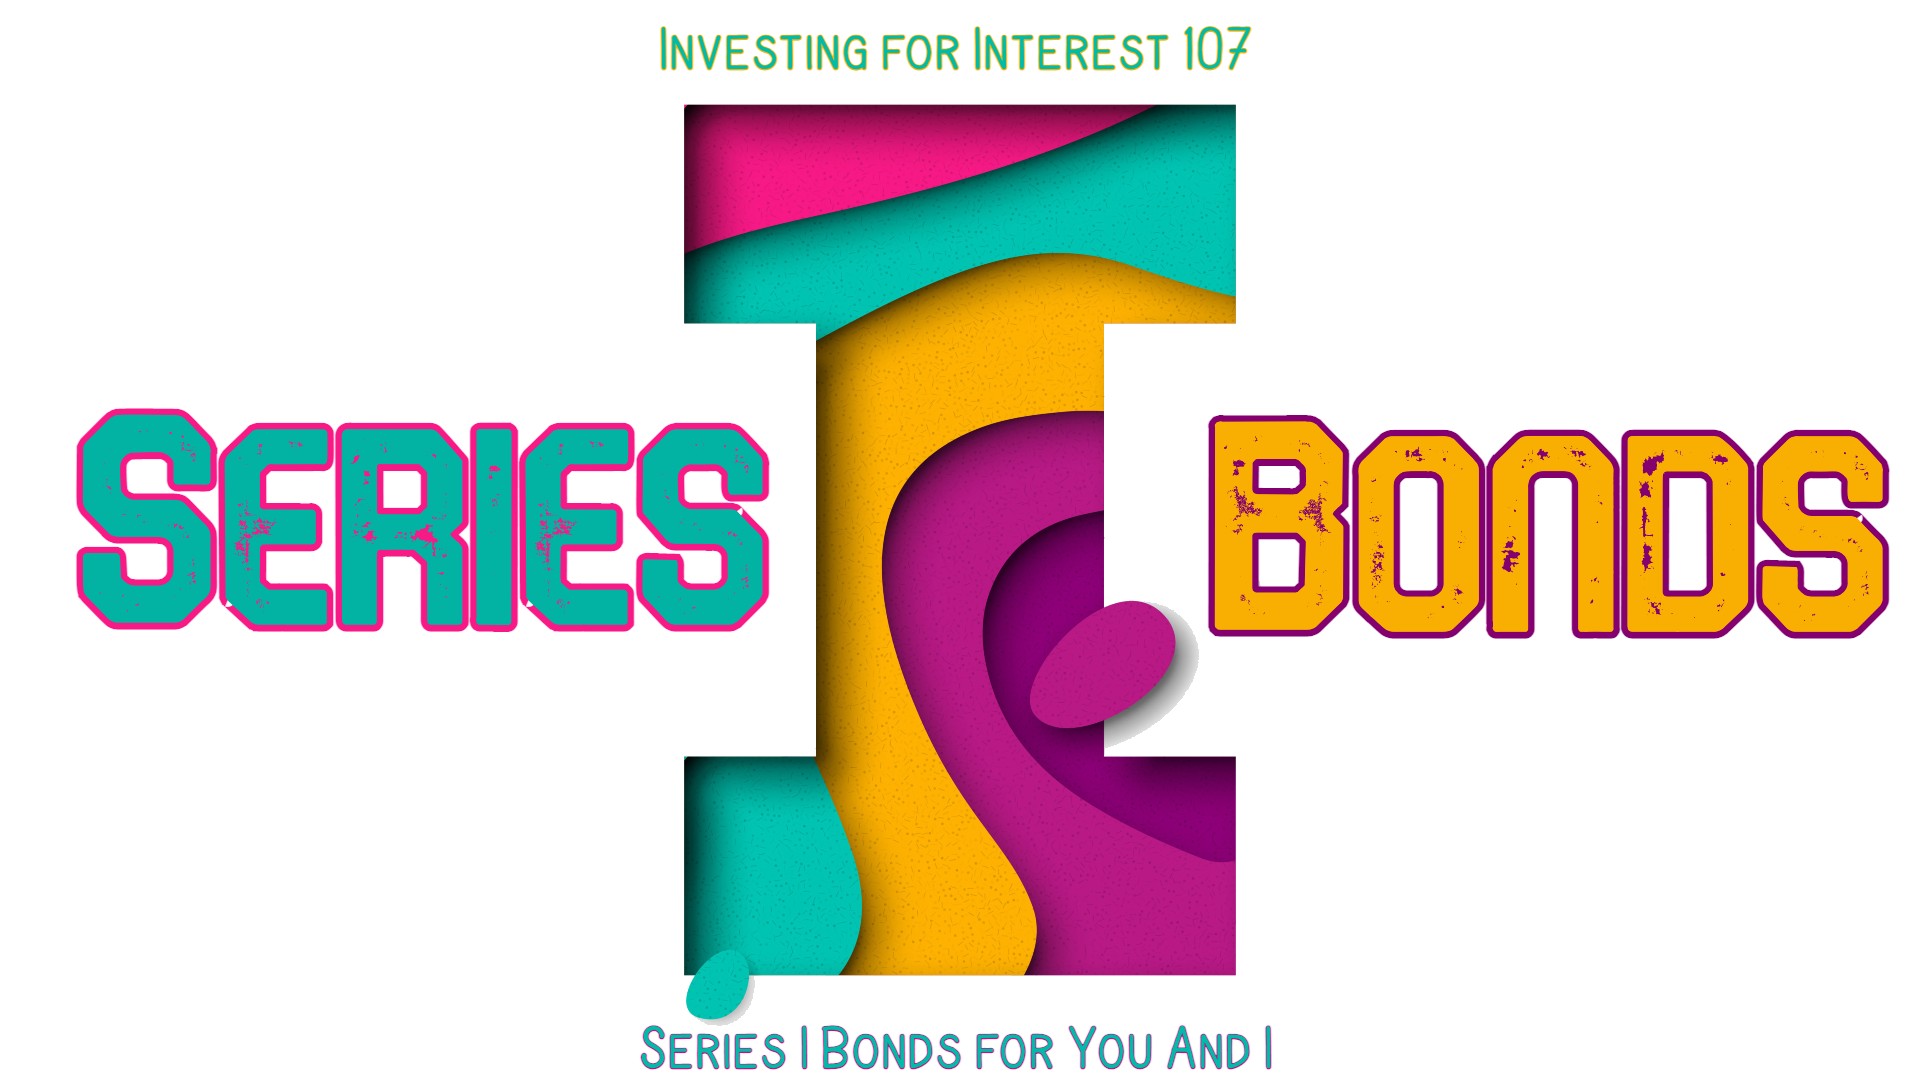 Investing for Interest 107 Series “I” Bonds For You and I Military